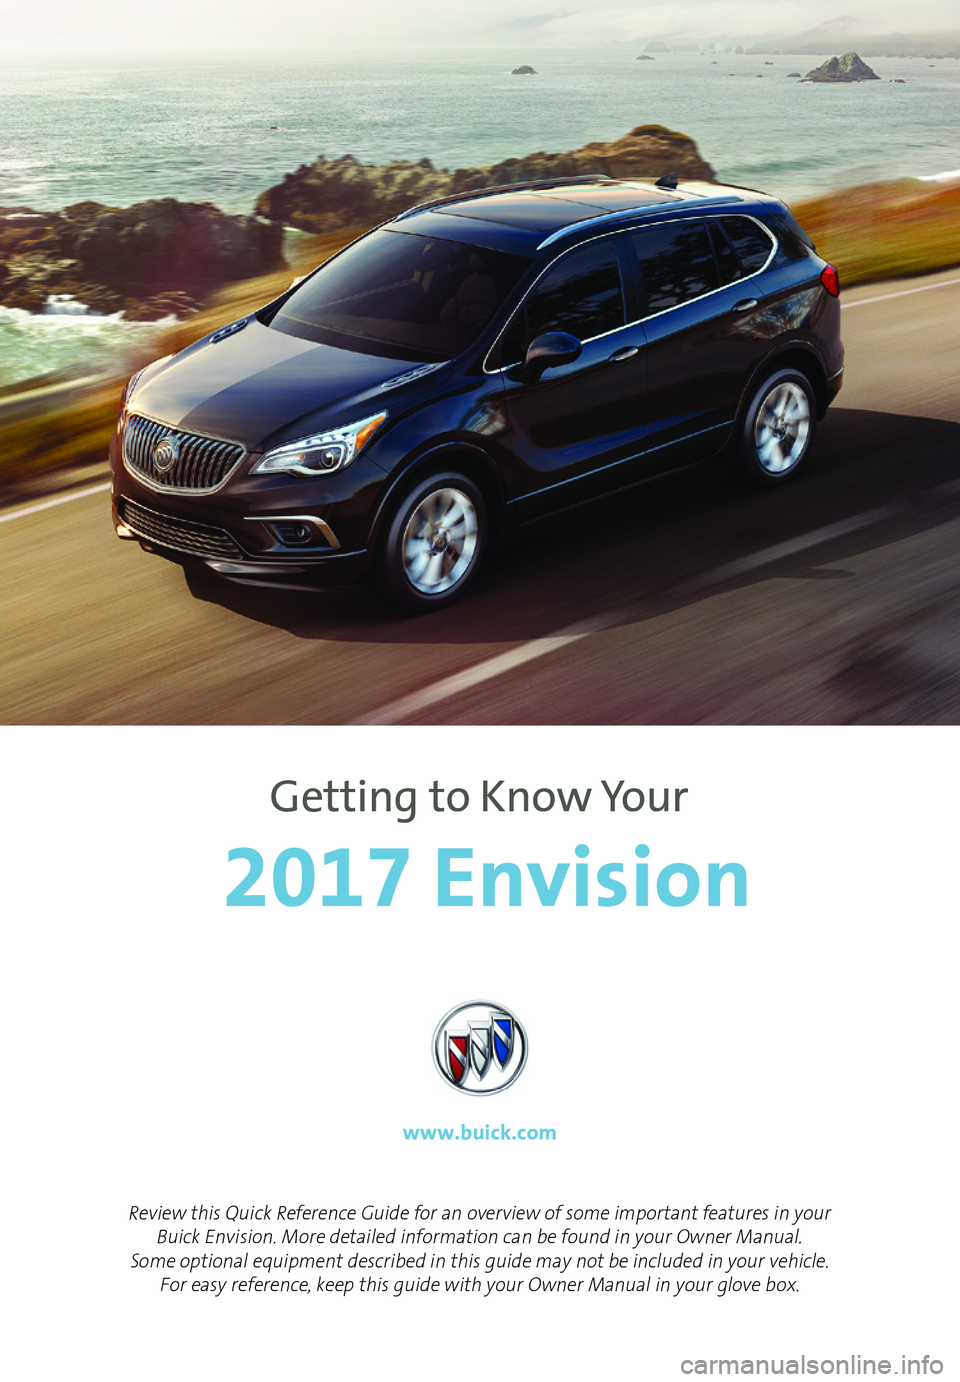 BUICK ENVISION 2017  Get To Know Guide 1
Review this Quick Reference Guide for an overview of some important features in your Buick Envision. More detailed information can be found in your Owner Manual.  Some optional equipment described i